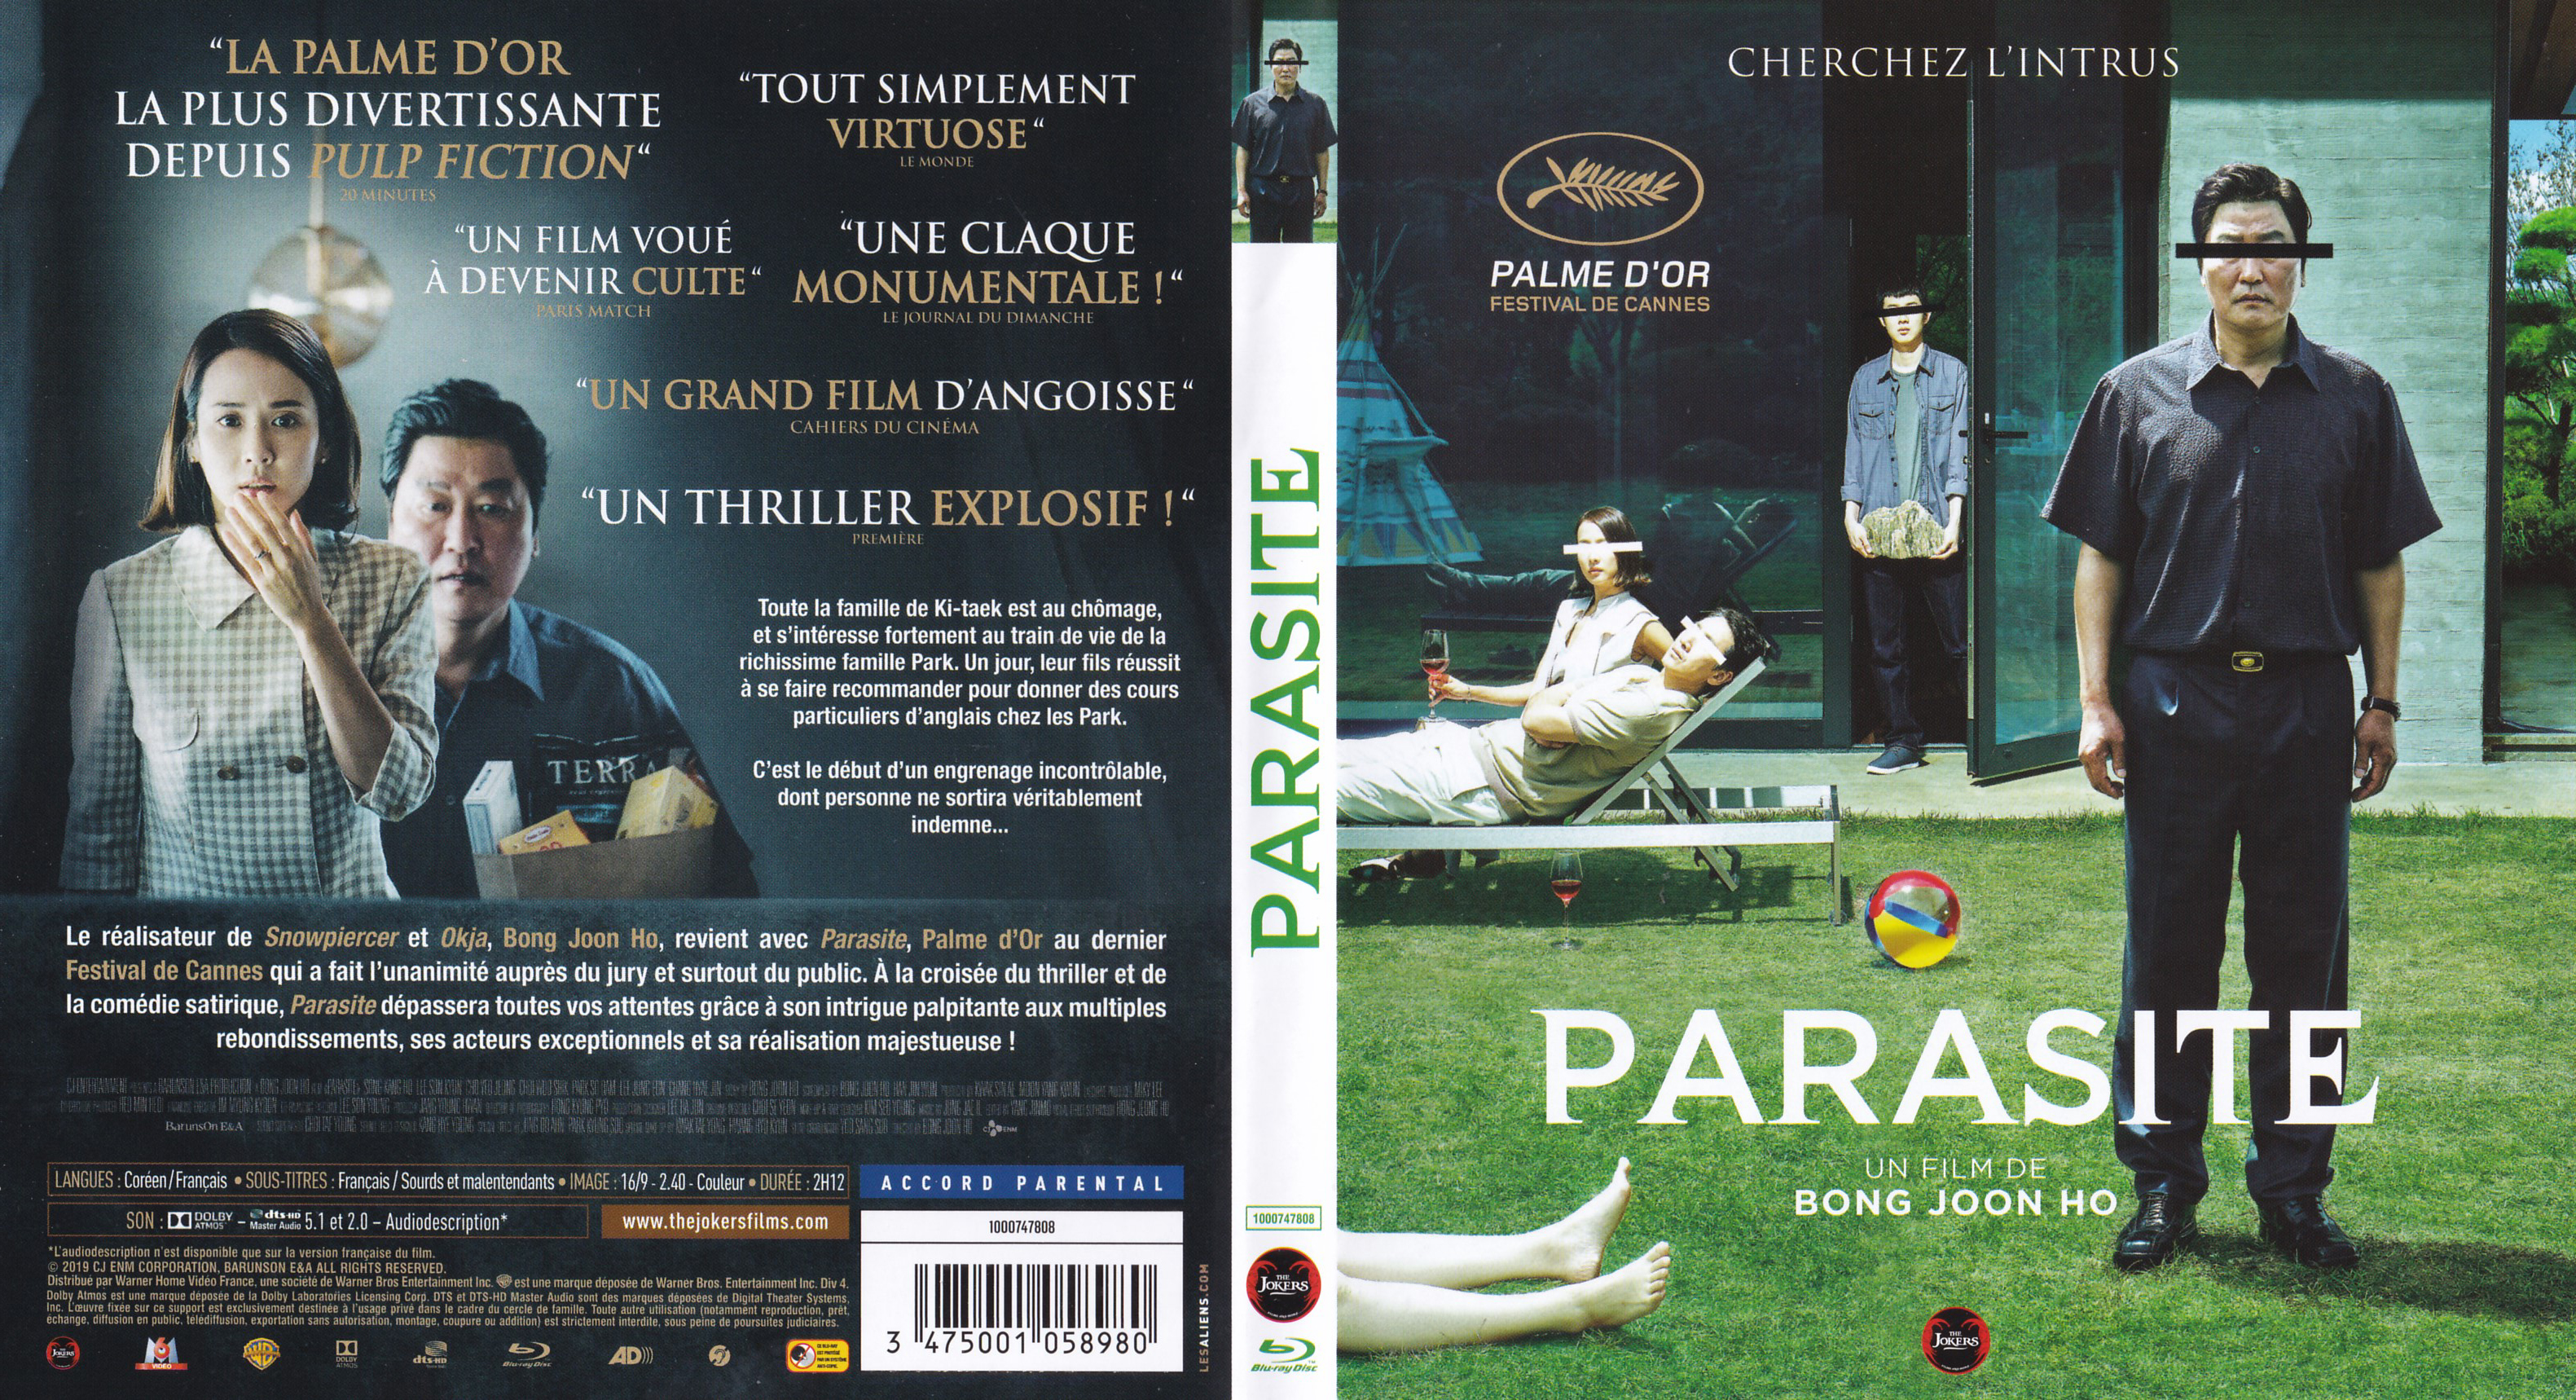 Jaquette DVD Parasite (BLU-RAY)